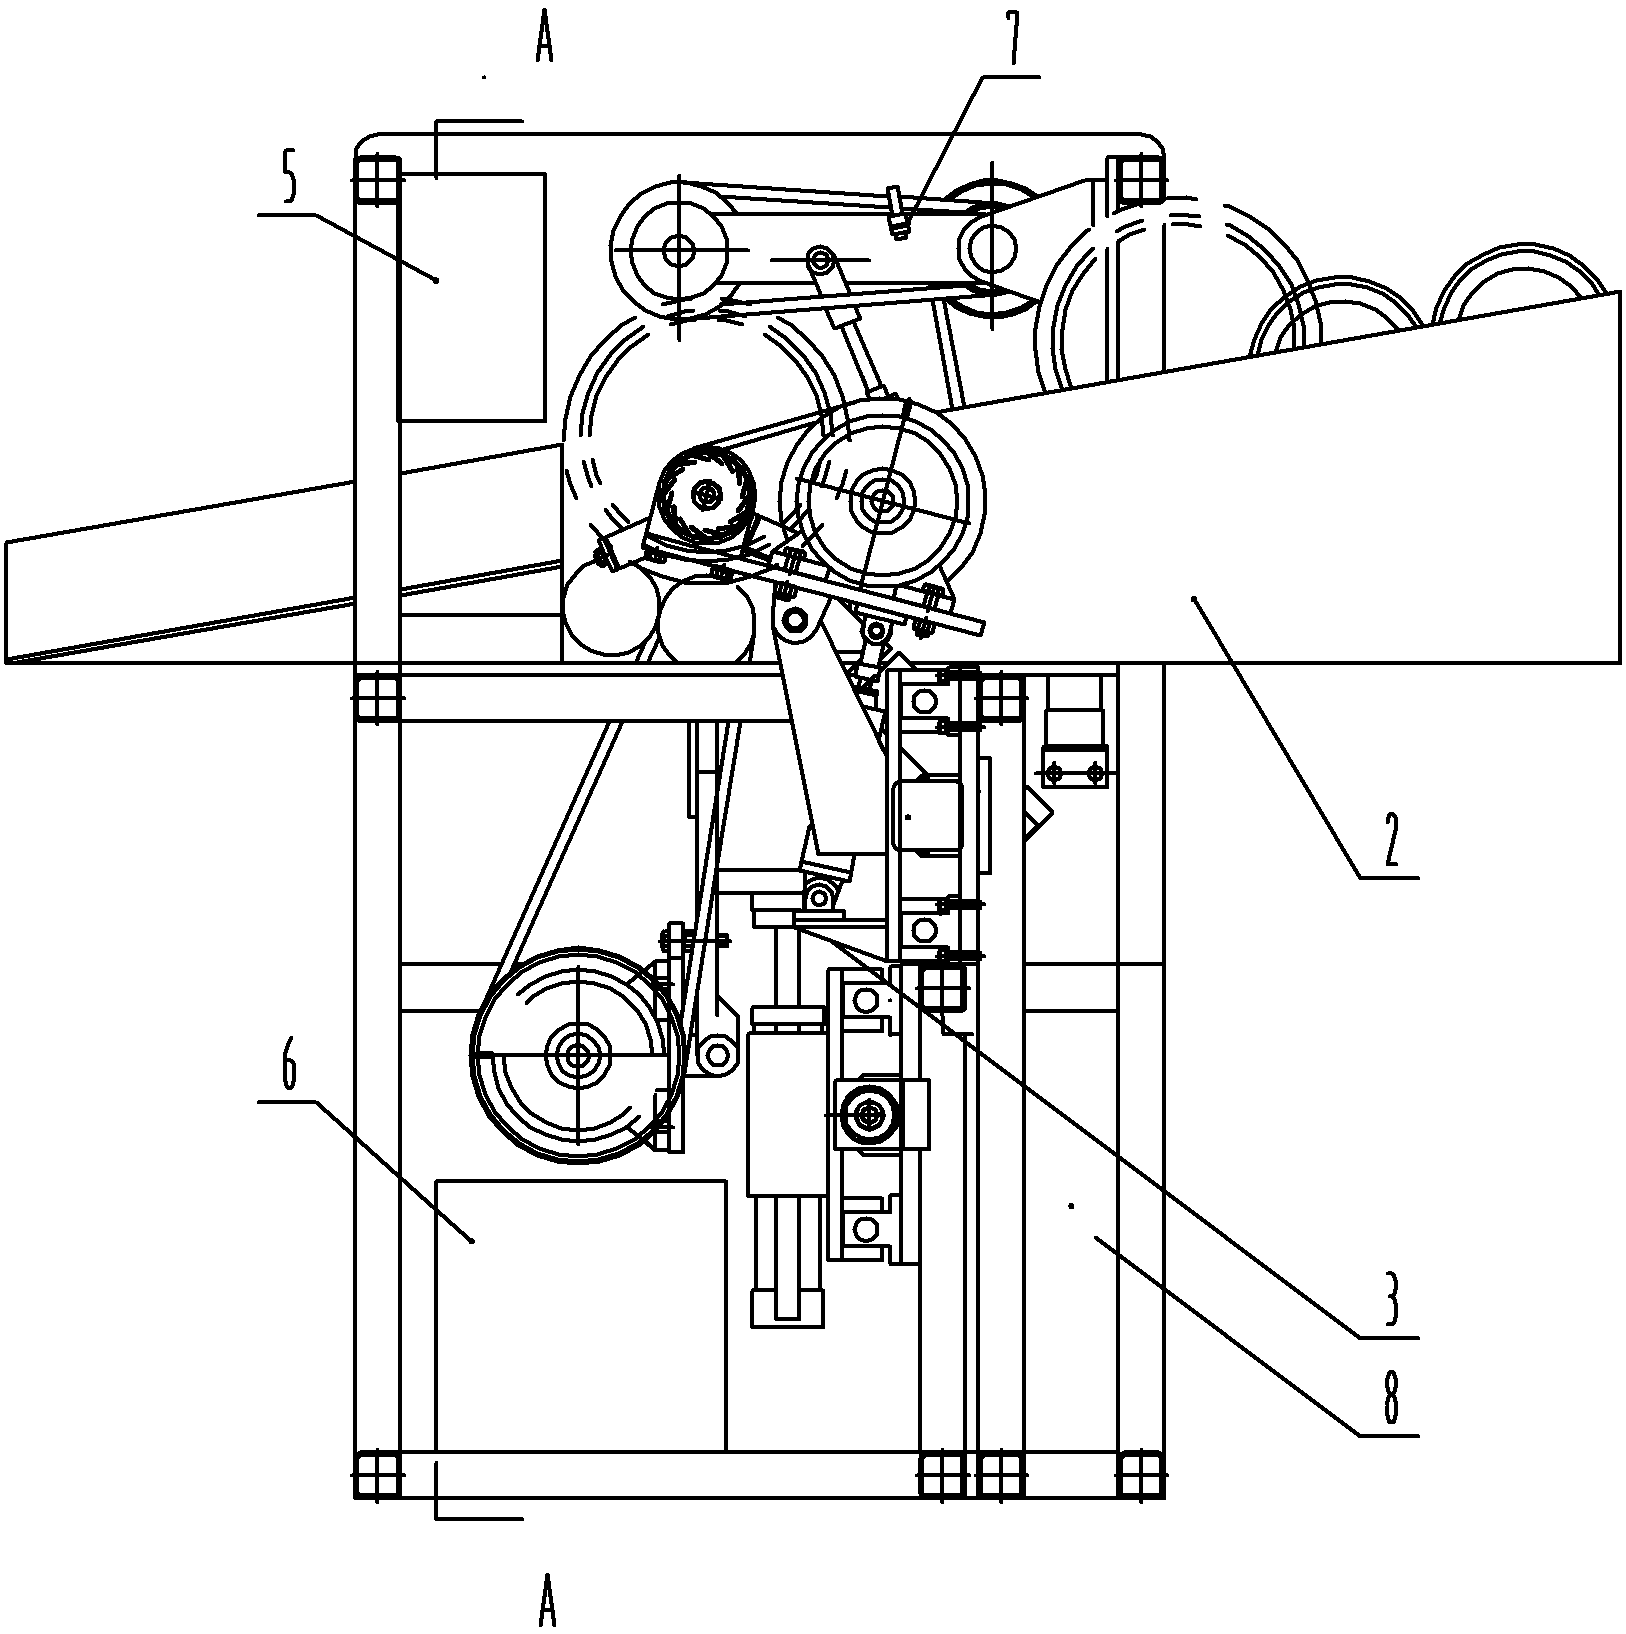 Internal-external full-automatic polisher for treating inner ring and outer ring of passenger train bearing